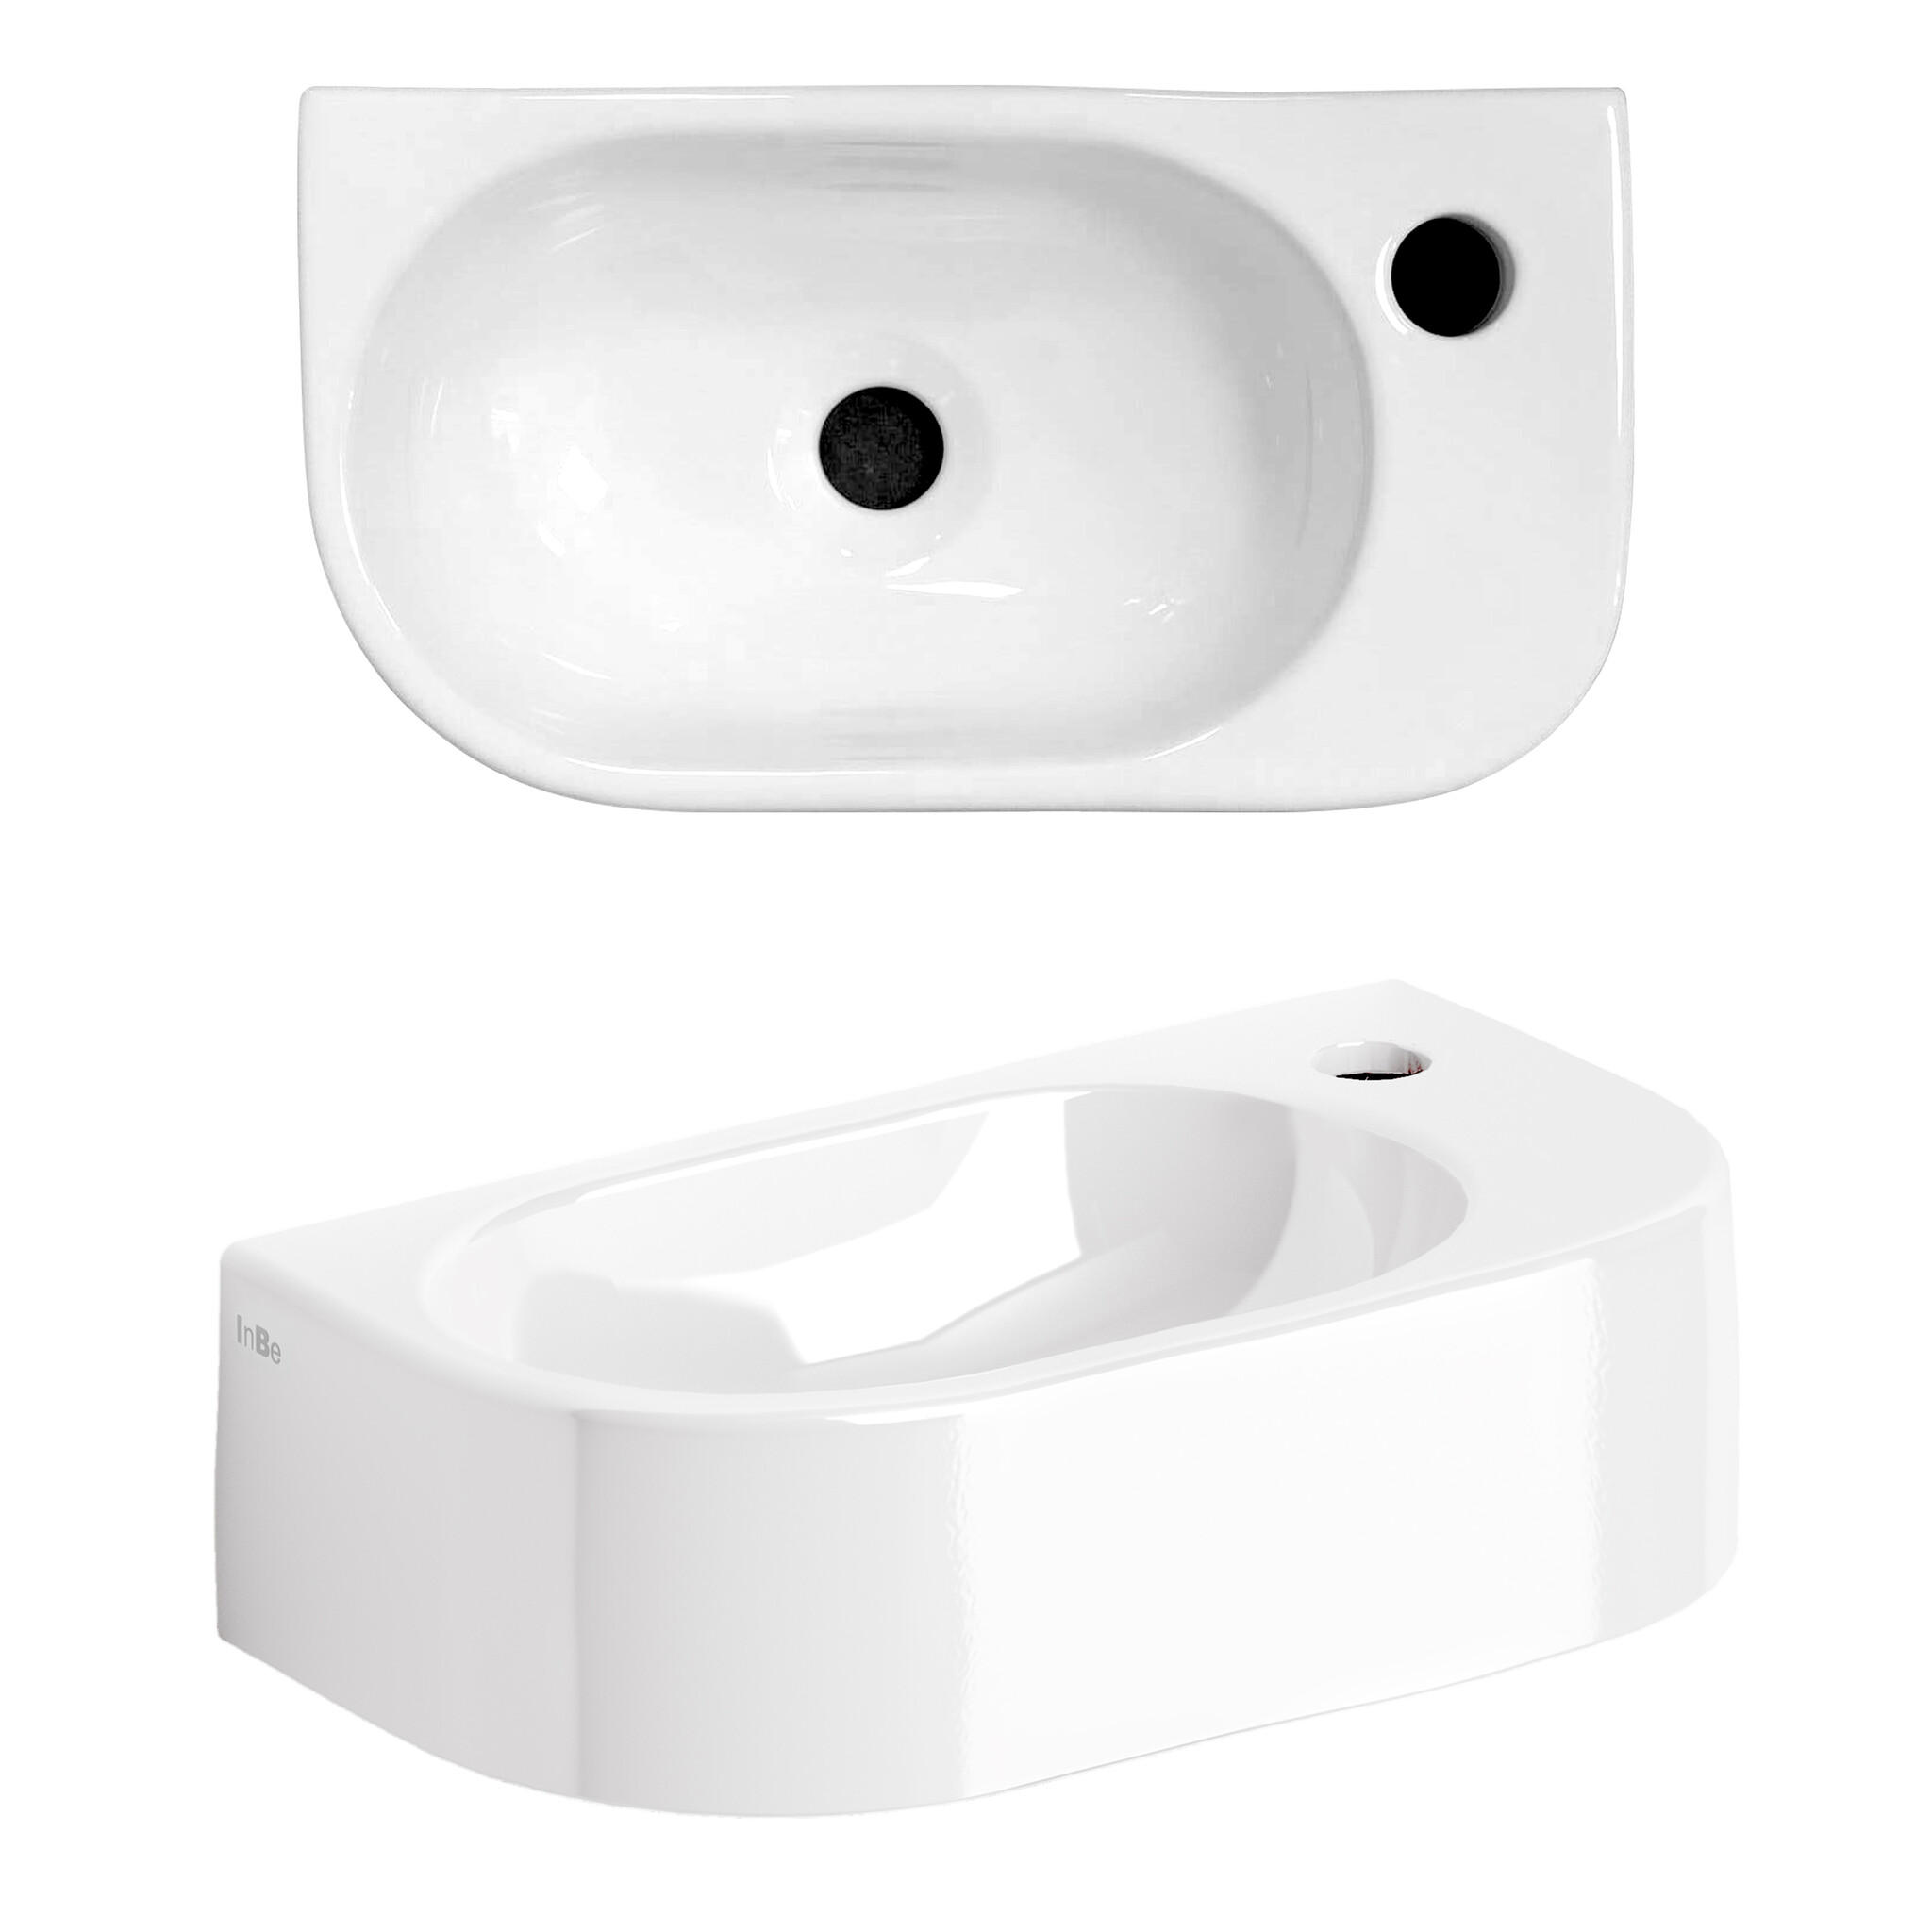 InBe InBe 7 handbasin, with taphole, without drain, white ceramic